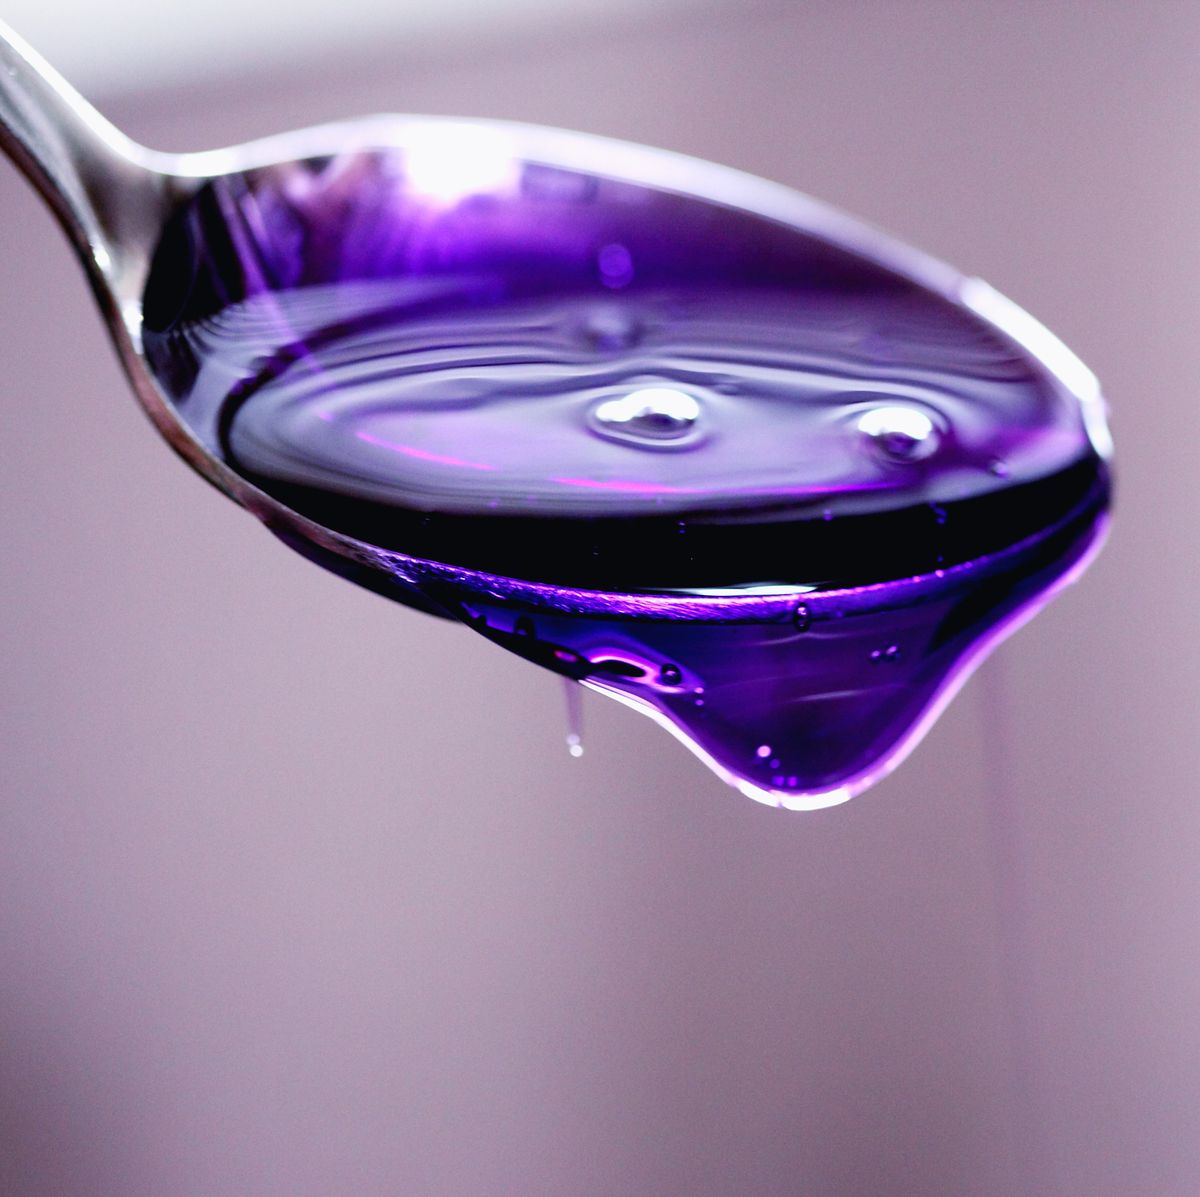 Close-Up Of Purple Medicine Syrup In Spoon